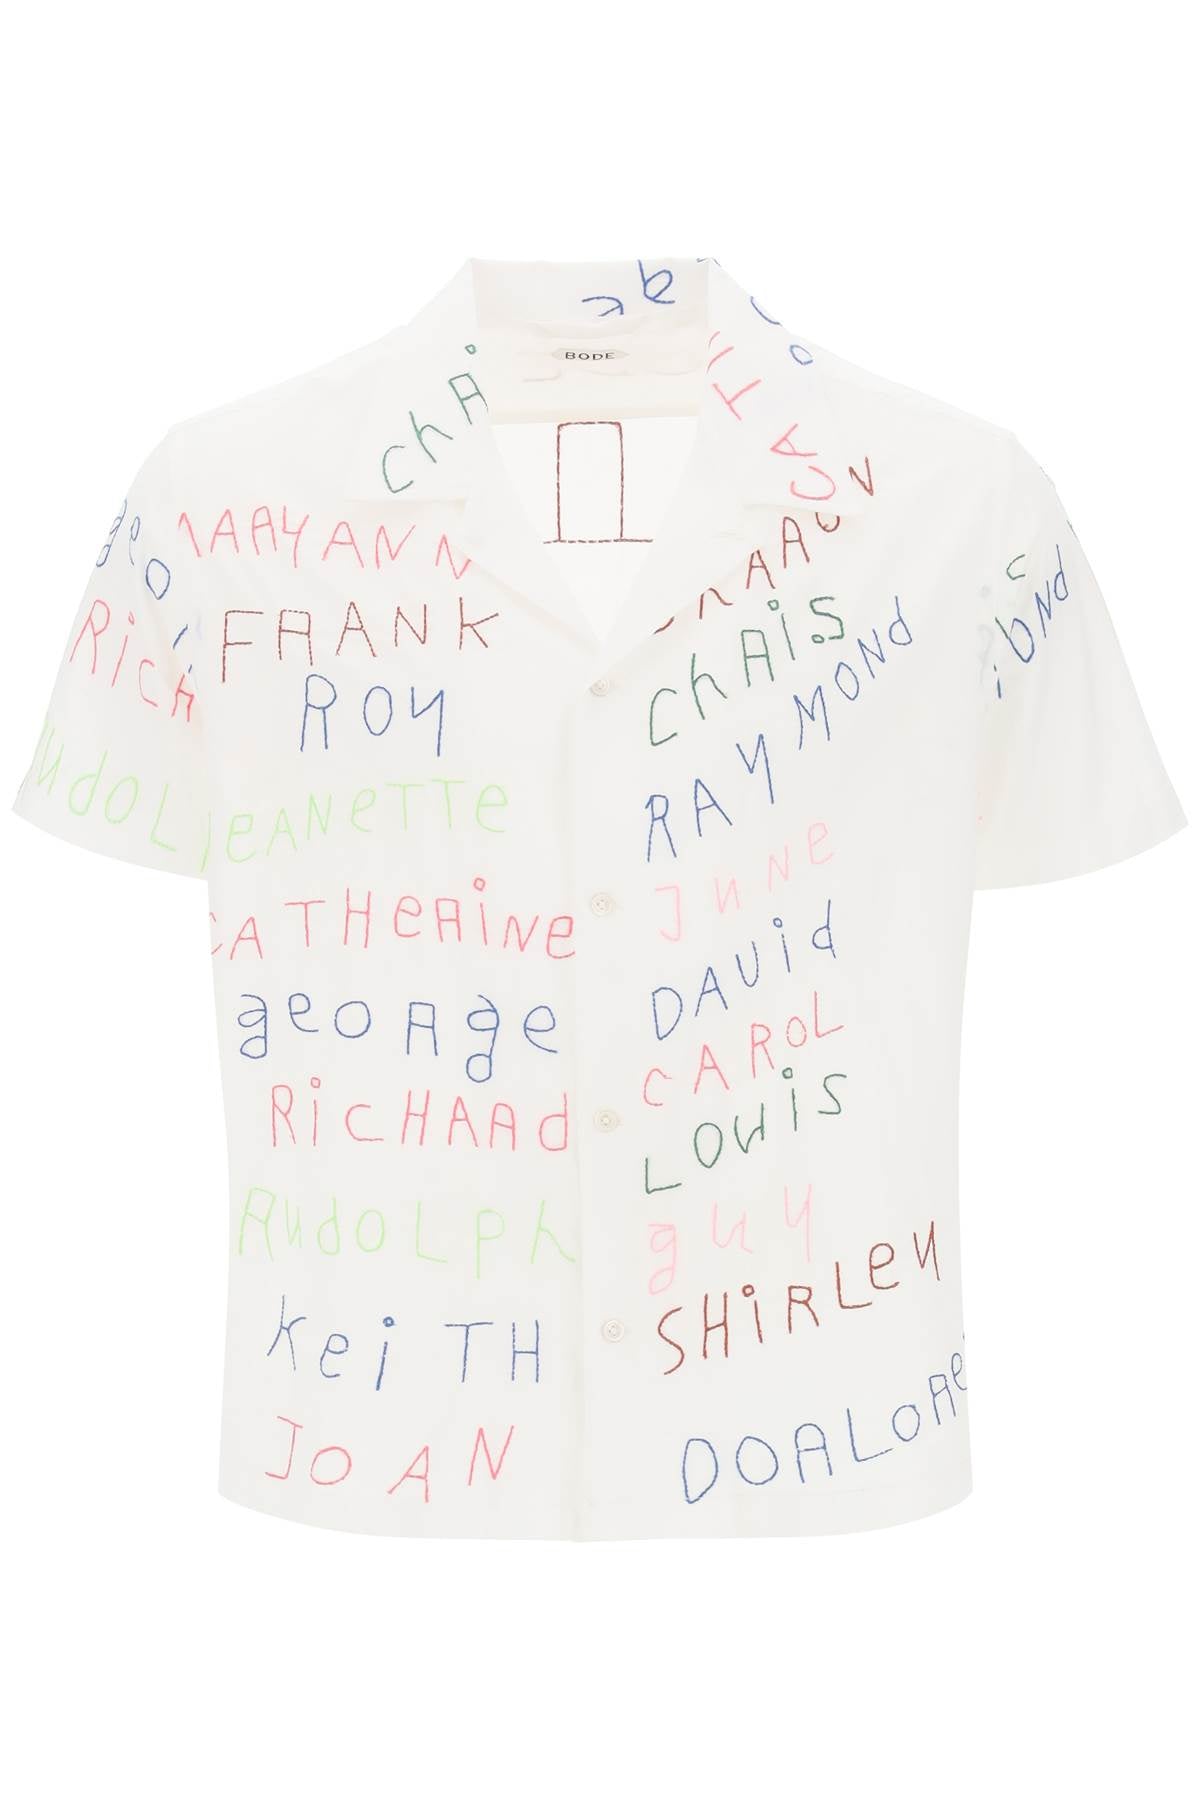 Bode Bode familial bowling shirt with lettering embroideries